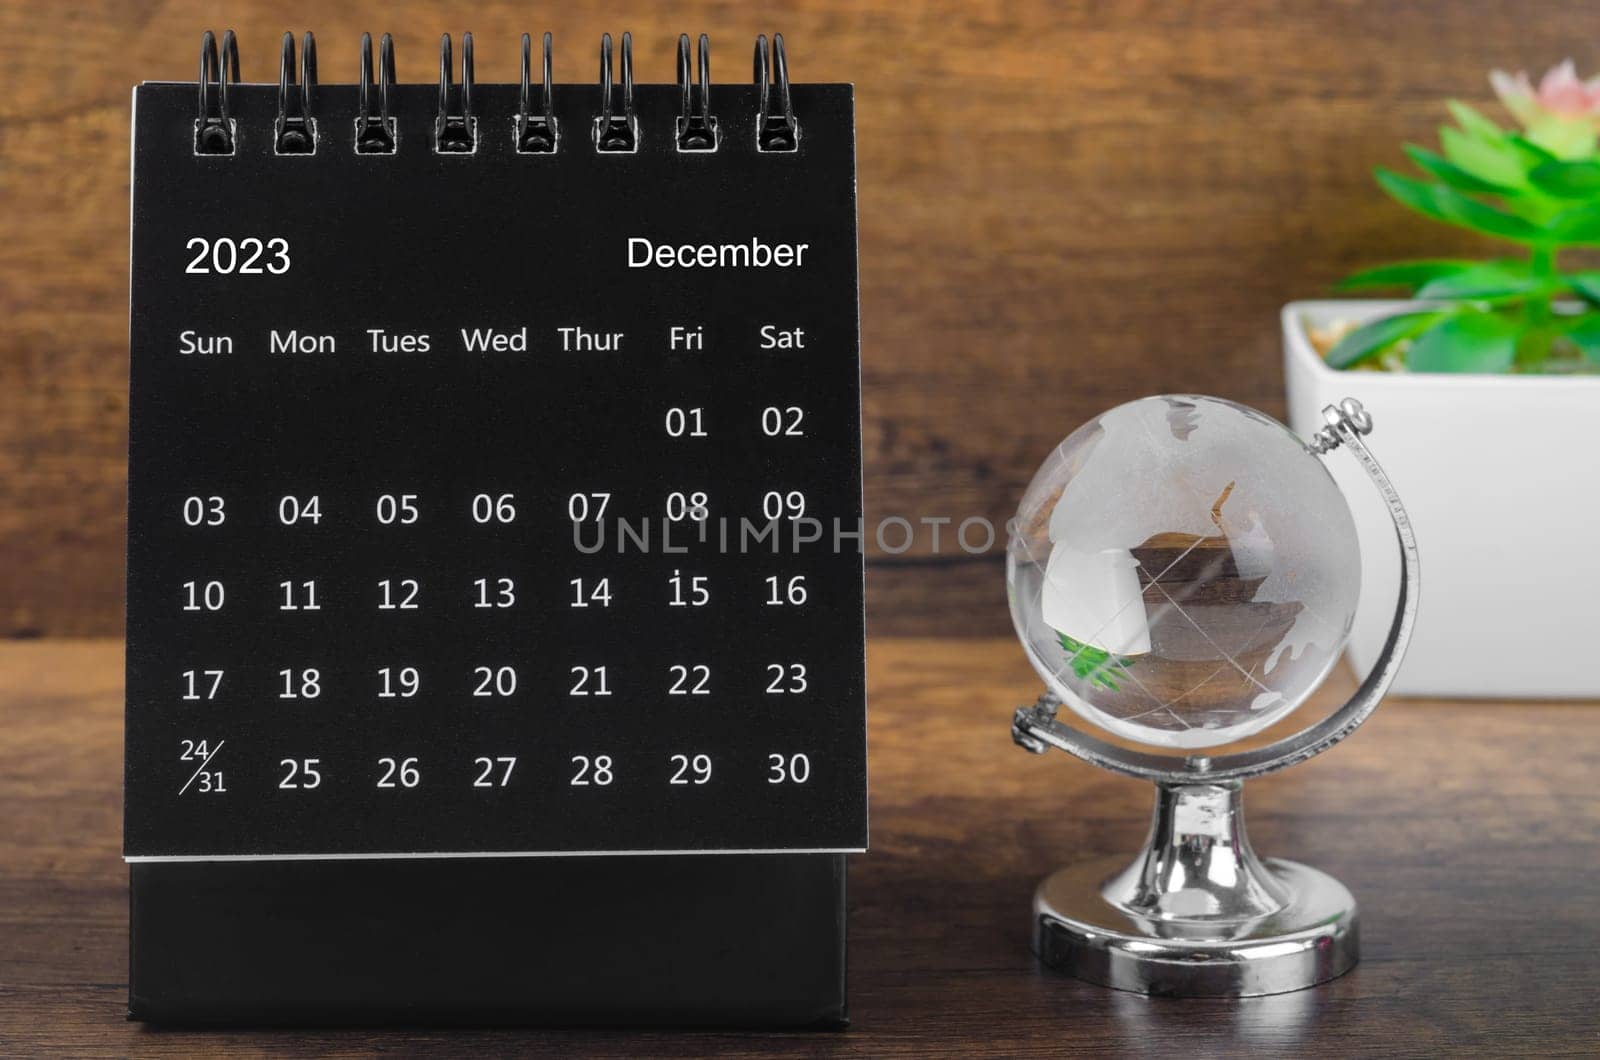 The December 2023 desk calendar for 2023 year Black color with a crystal globe against a wooden table background. by Gamjai